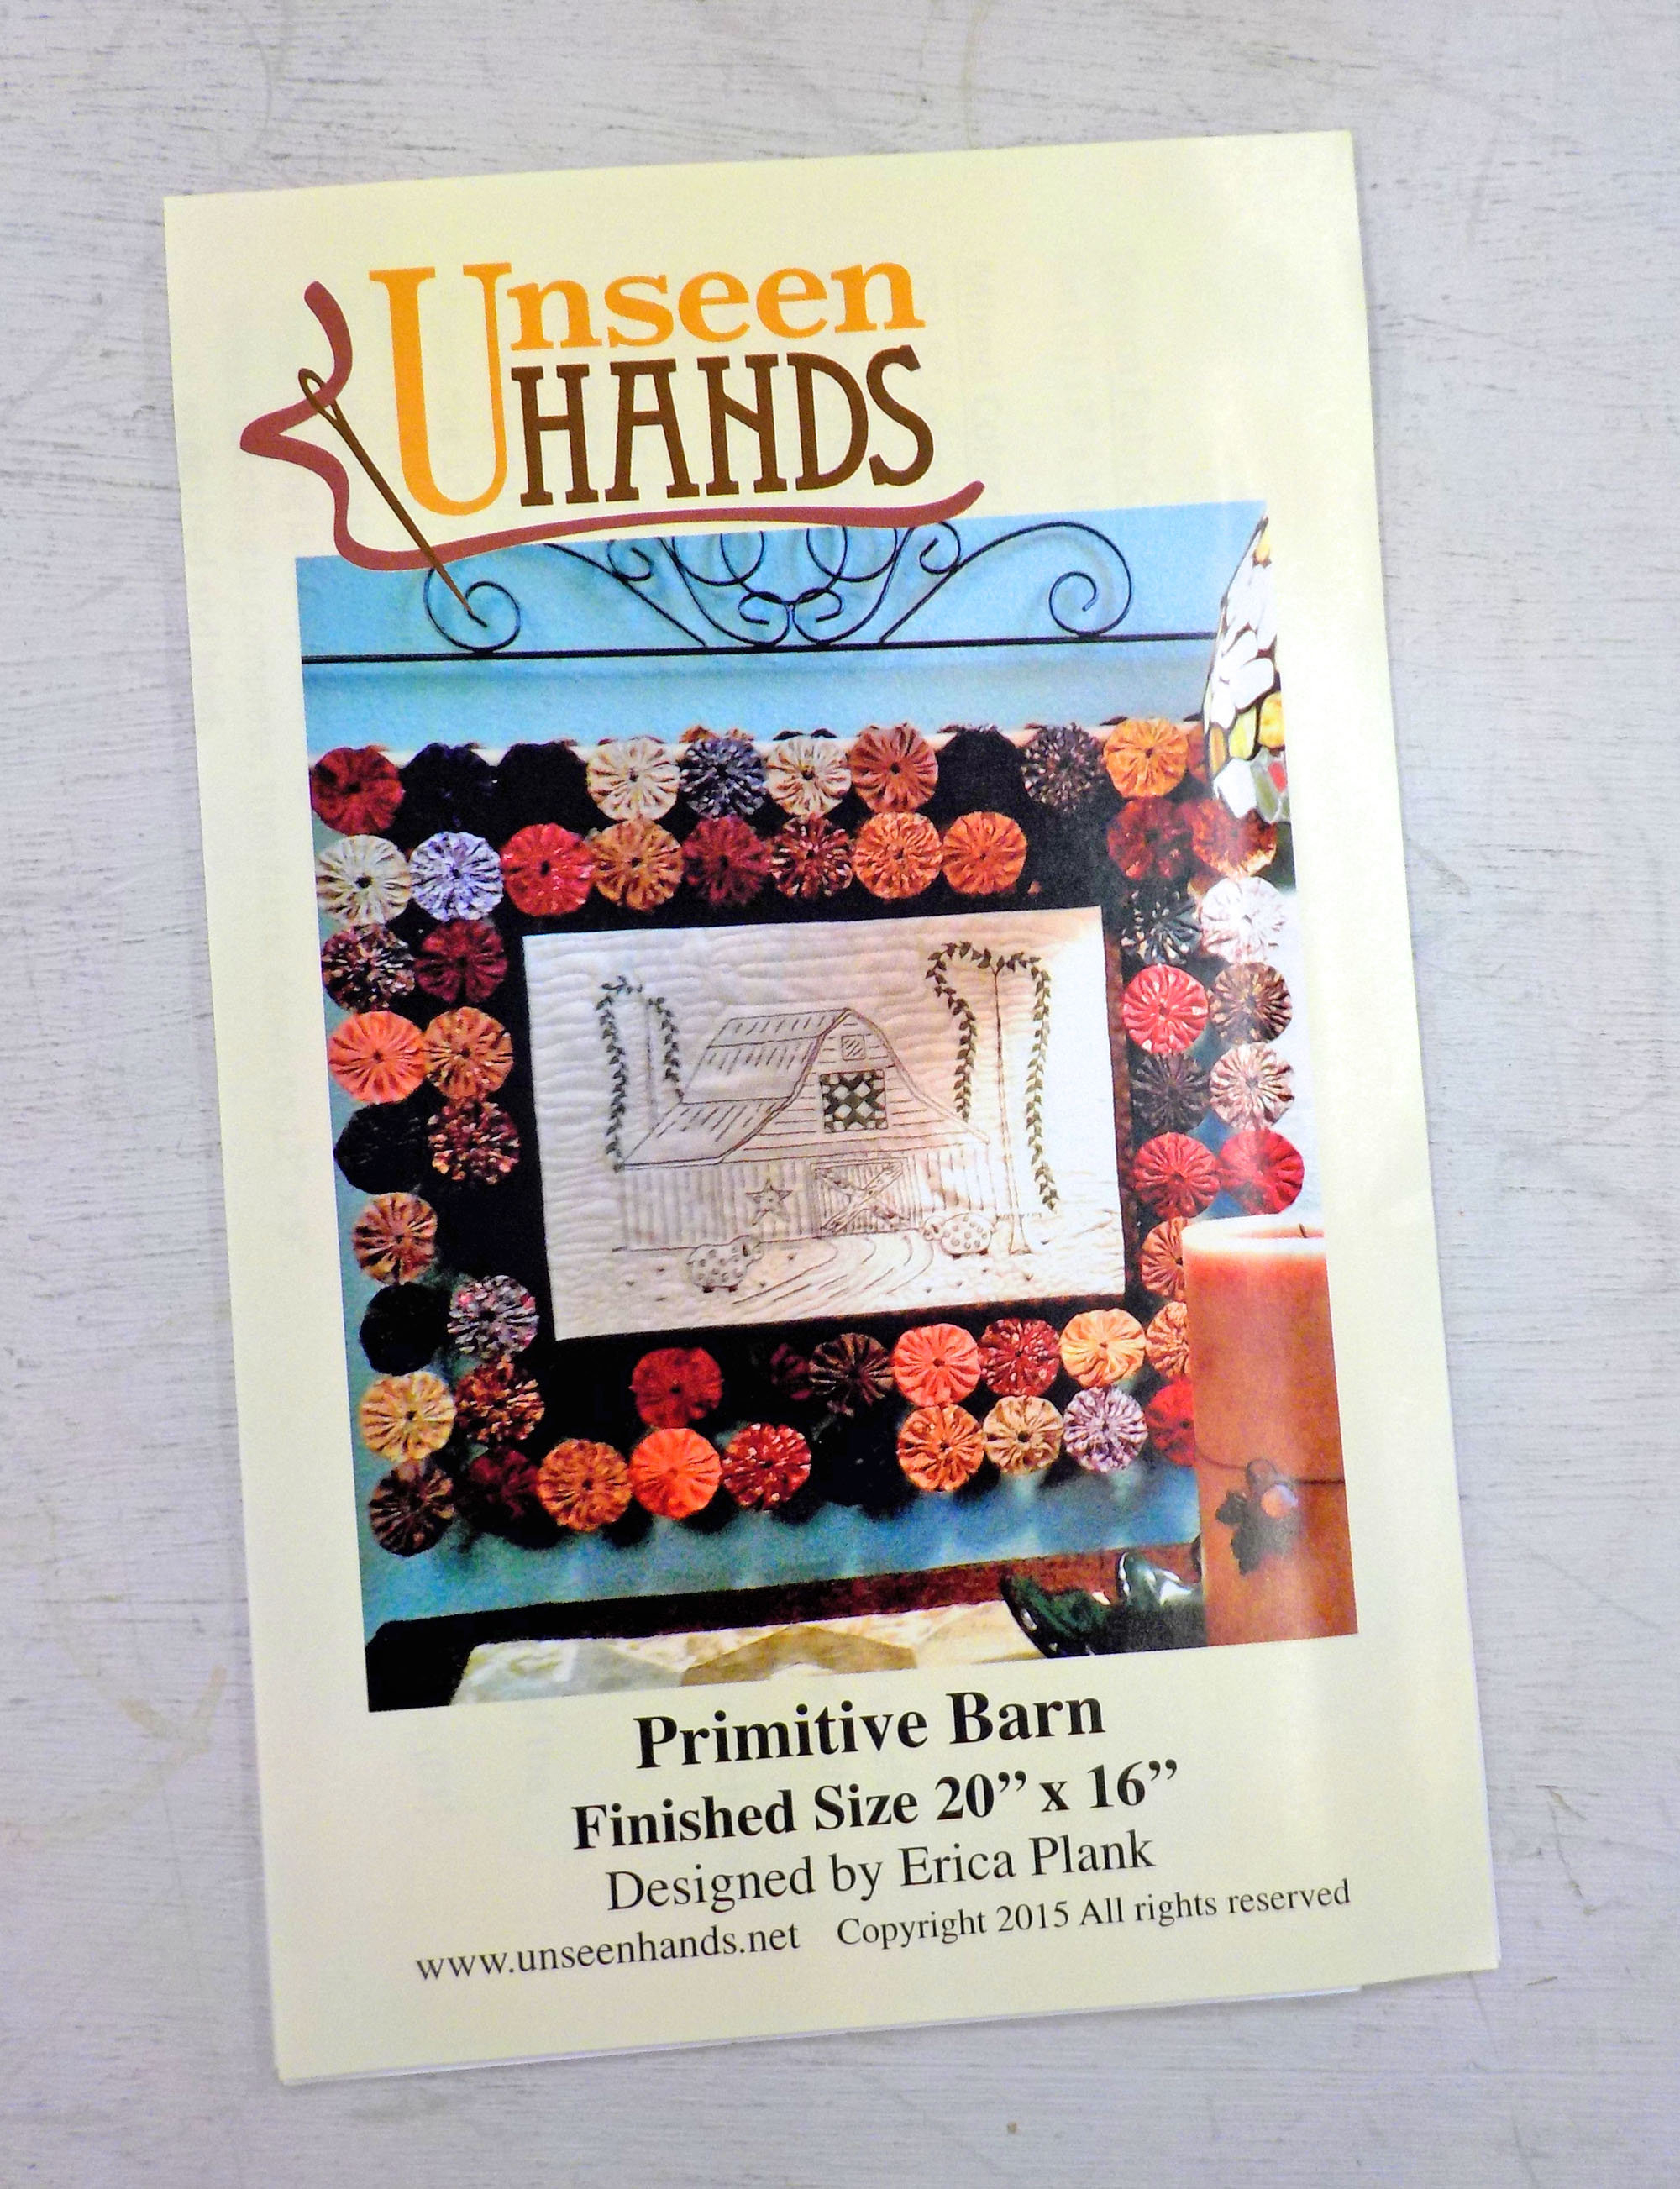 Primitive Hand Embroidery Patterns Primitive Barn Pattern Erica Plank Of Unseen Handsembroidery